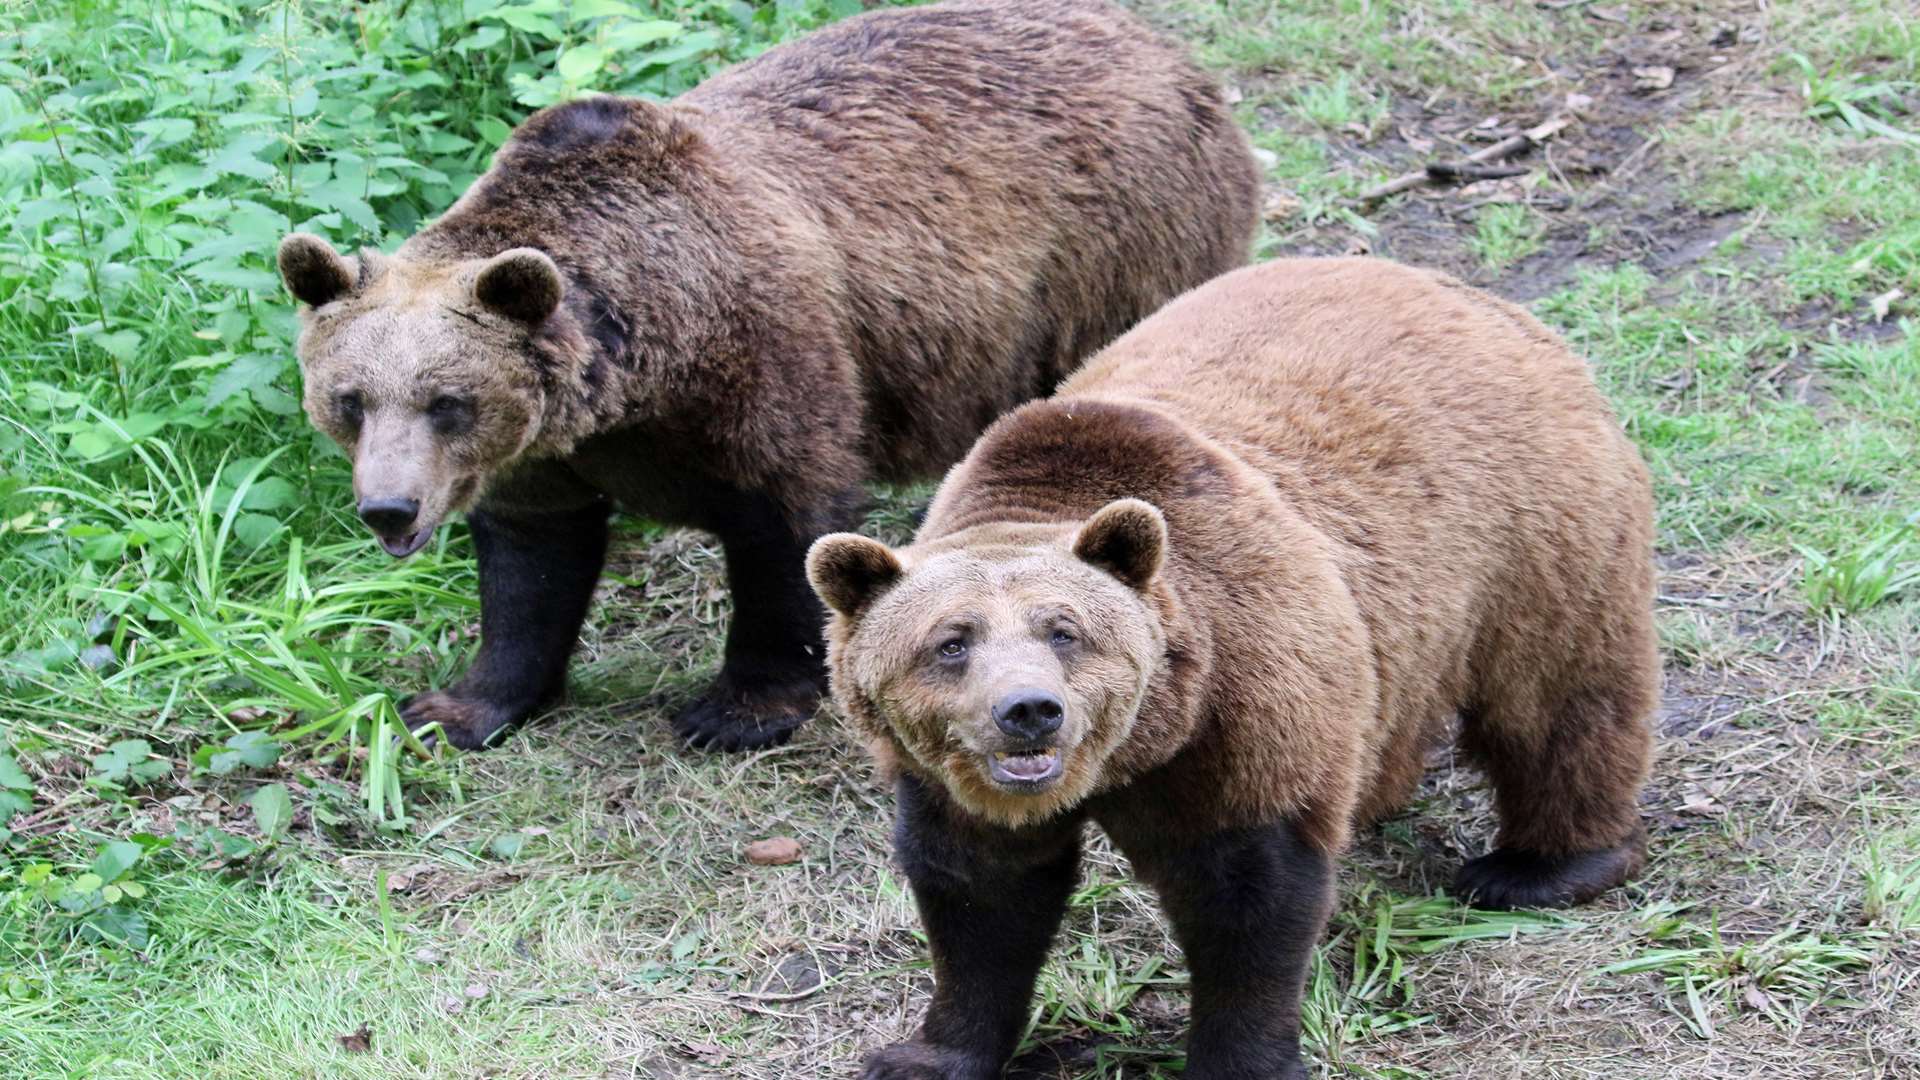 The Kent Big Weekend could put a smile on your face - like these bears at Wildwood